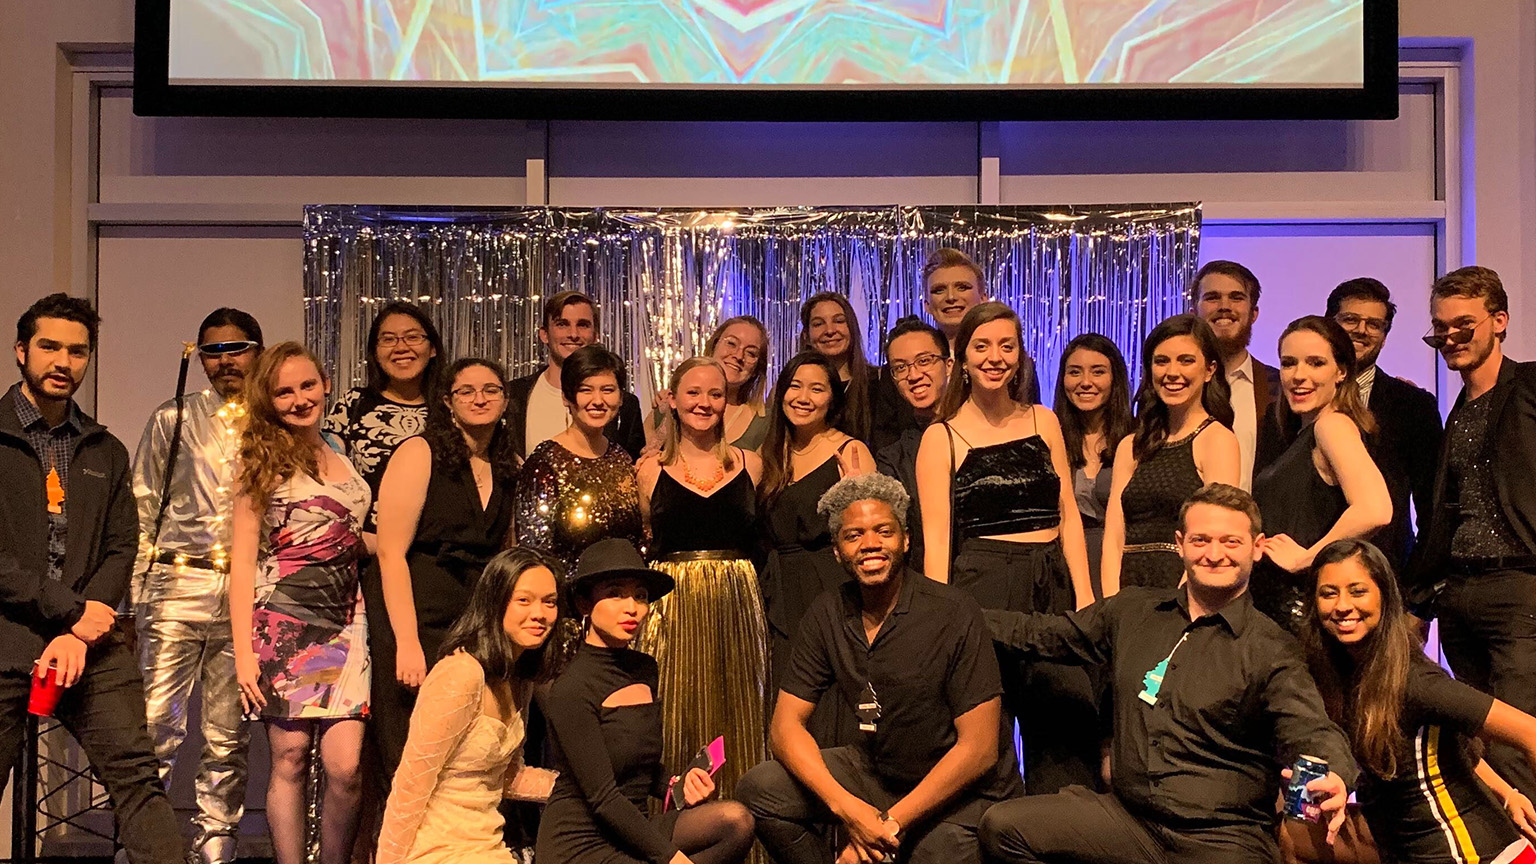 Group photo of AIAS at the Beaux Arts Ball at the Garage in Tech Square